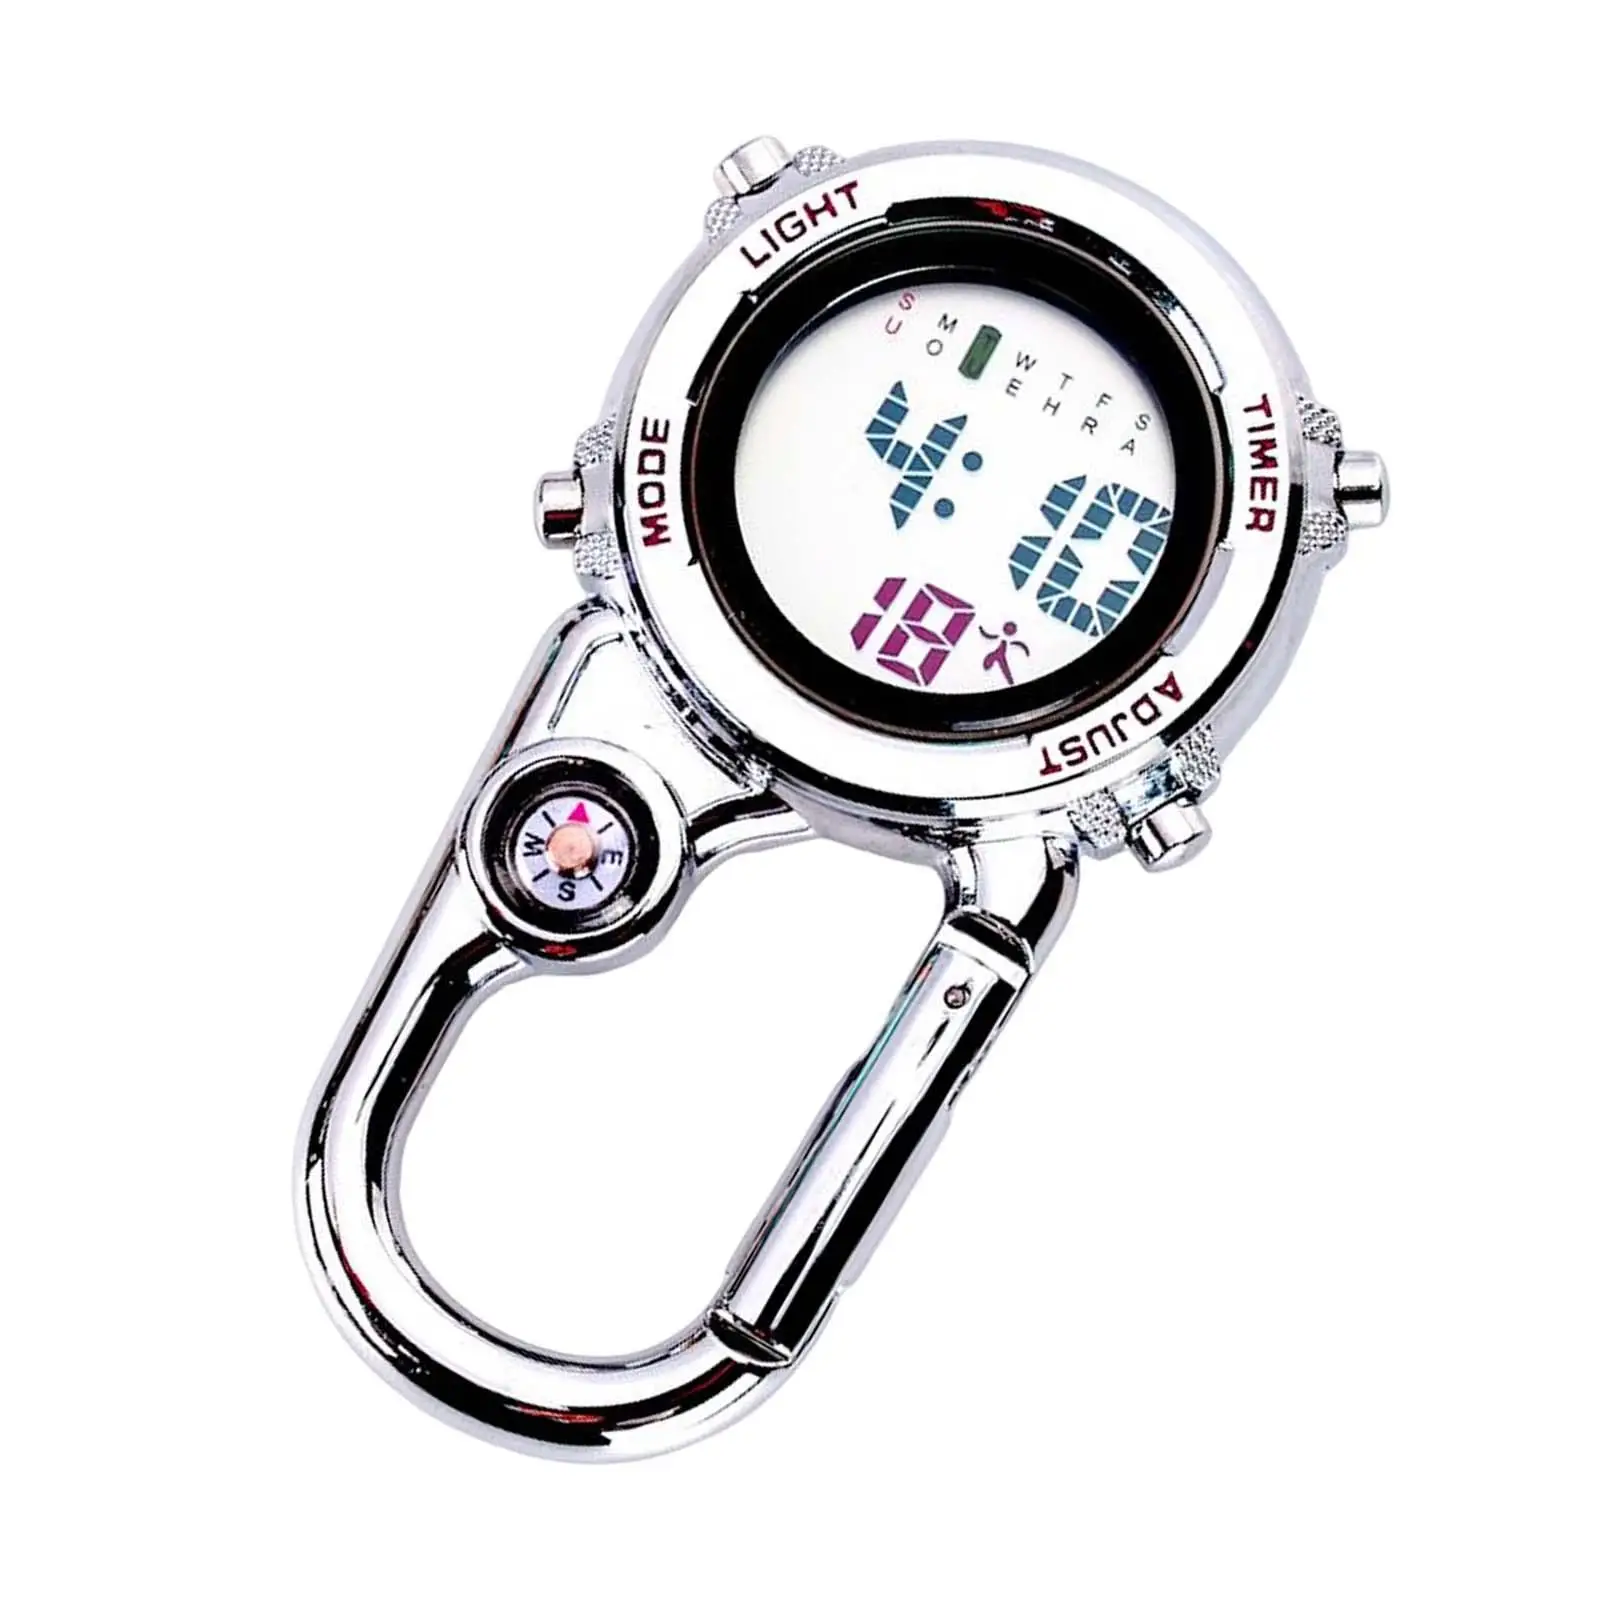 Multifunctional Digital Carabiner Watch Backpack Fob Watch for Outdoor Study